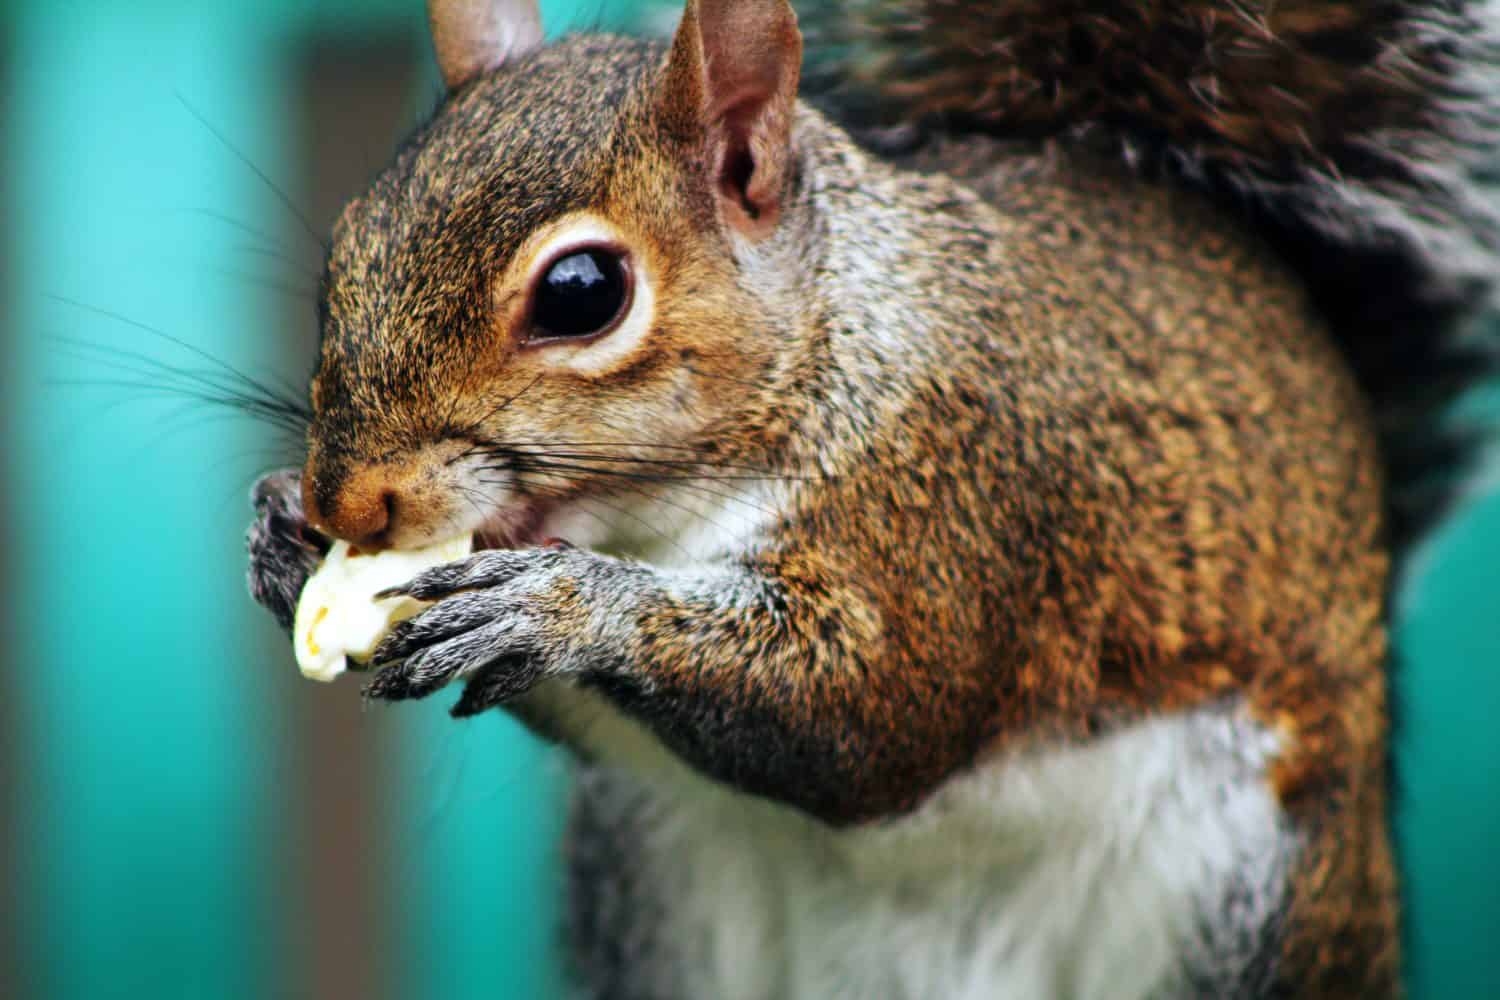 Squirrel eating popcorn out of trash